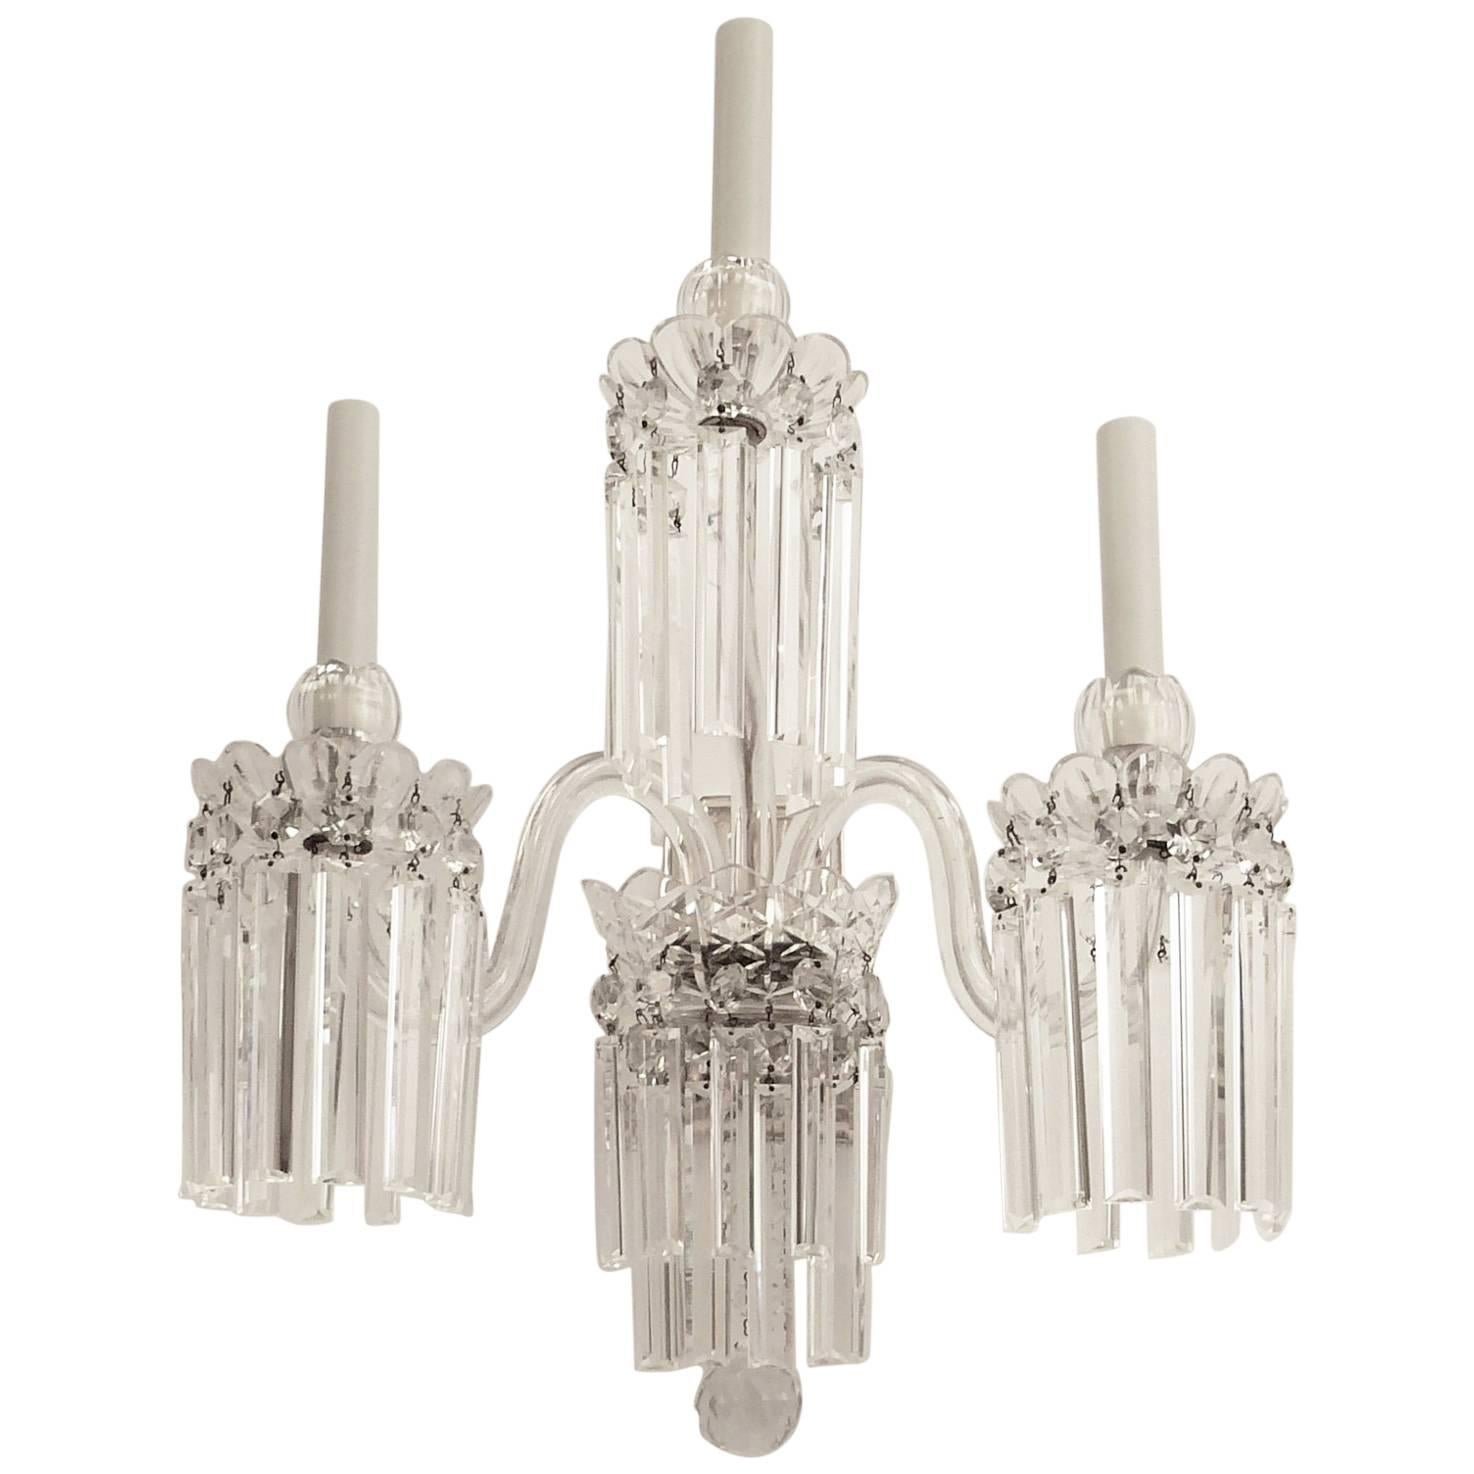 Four Very Fine Mid-19th Century English Cut Crystal Sconces, Attributed to Osler